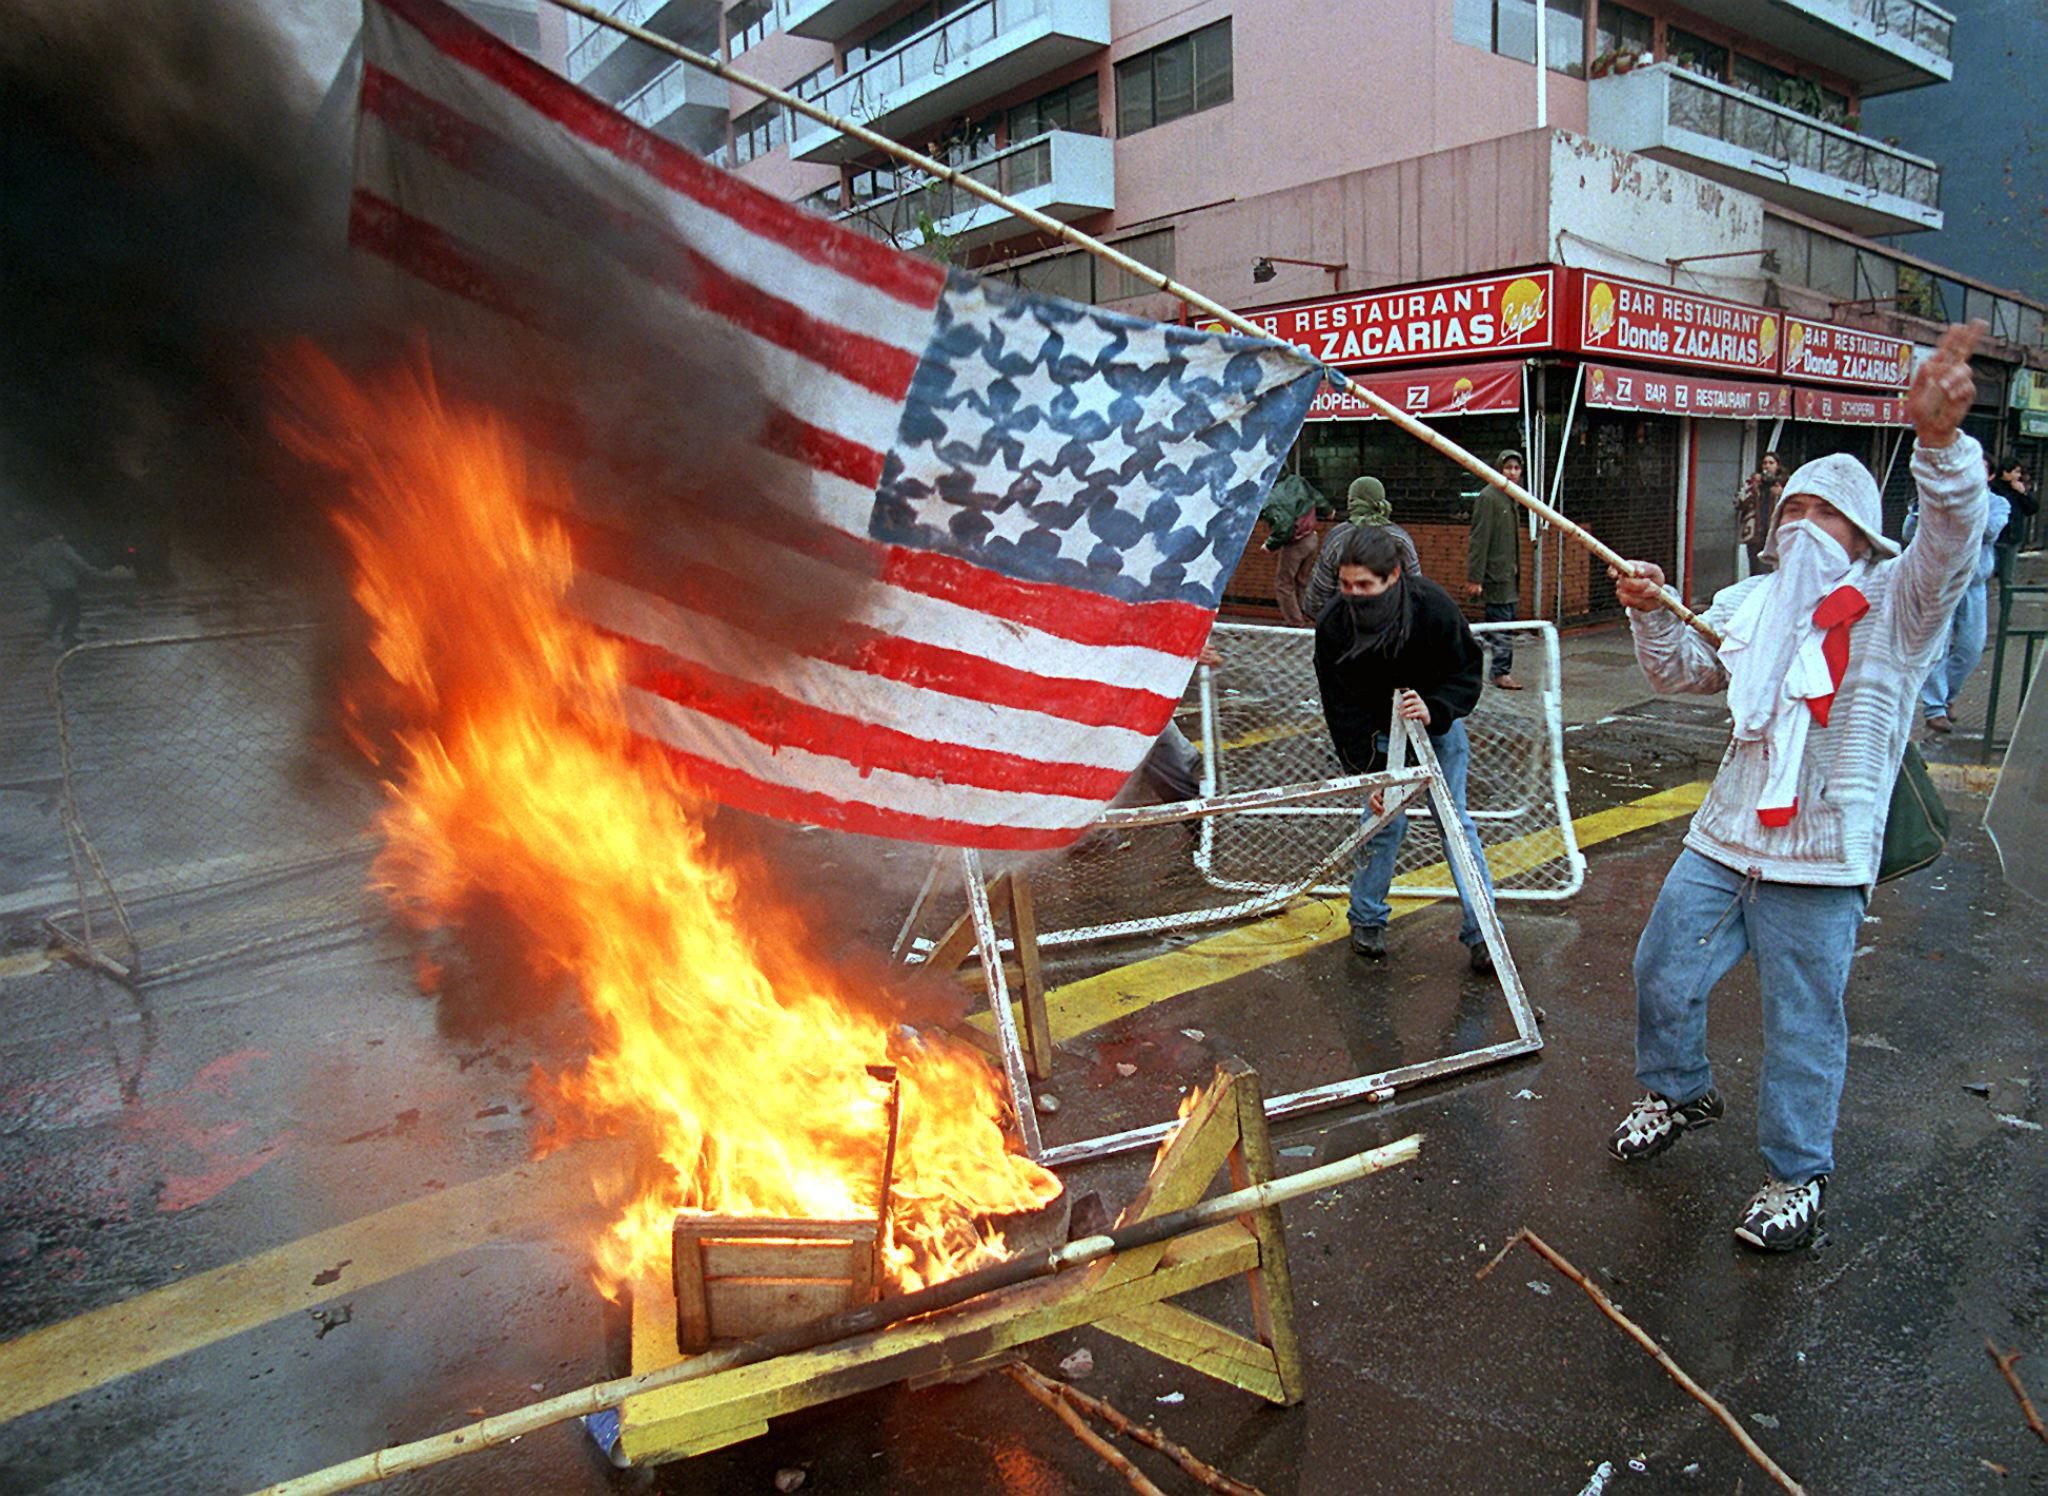 A man burns an American flag in the streets of Santiago, Chile during demonstrations marking the 25th anniversary of the death of Chilean President Salvador Allende.  (Photo by ORLANDO BARRIA / AFP).